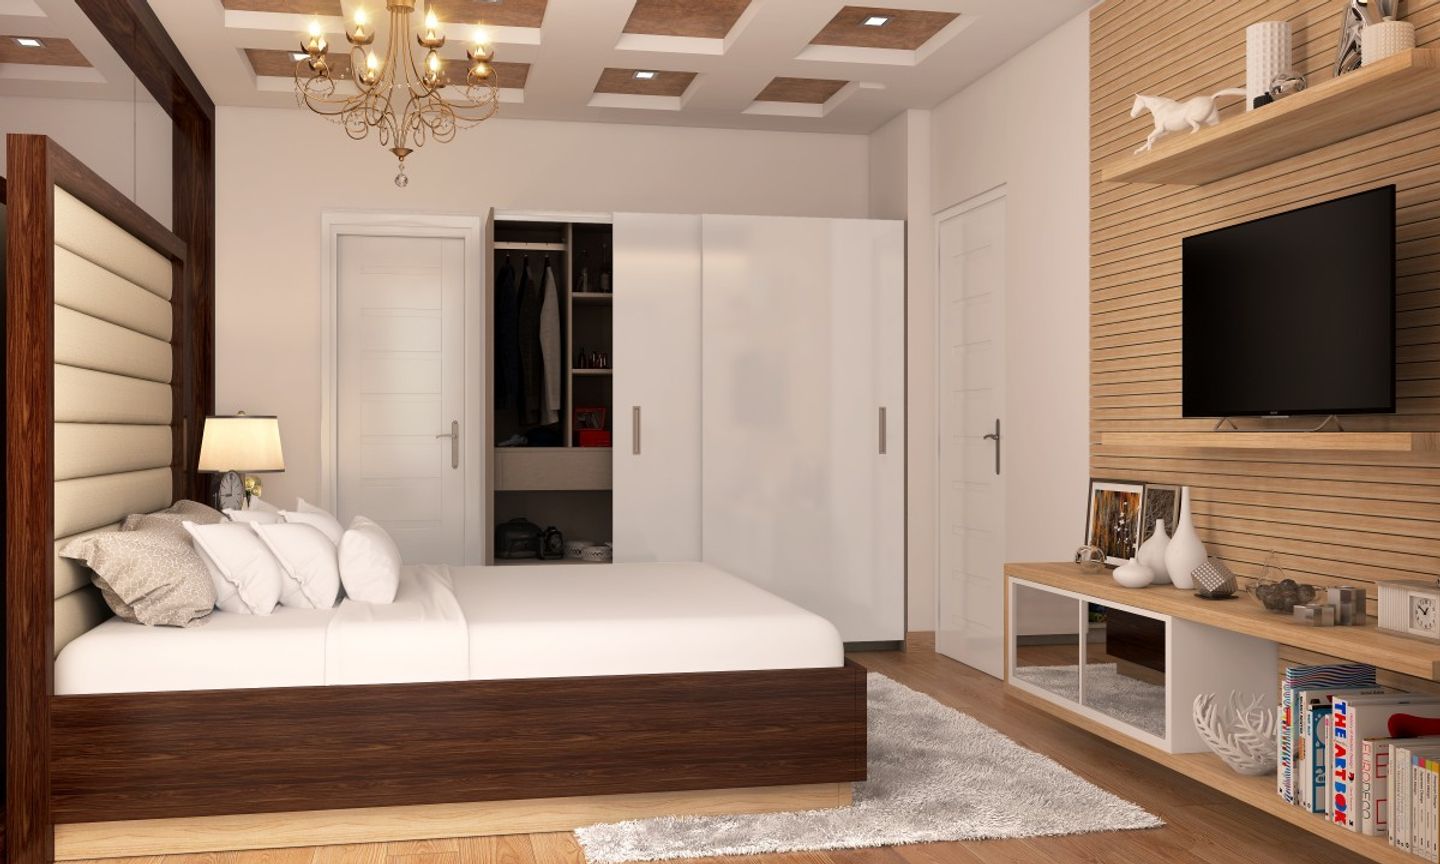 Contemporary Master Bedroom Design In White And Brown With Wall Design